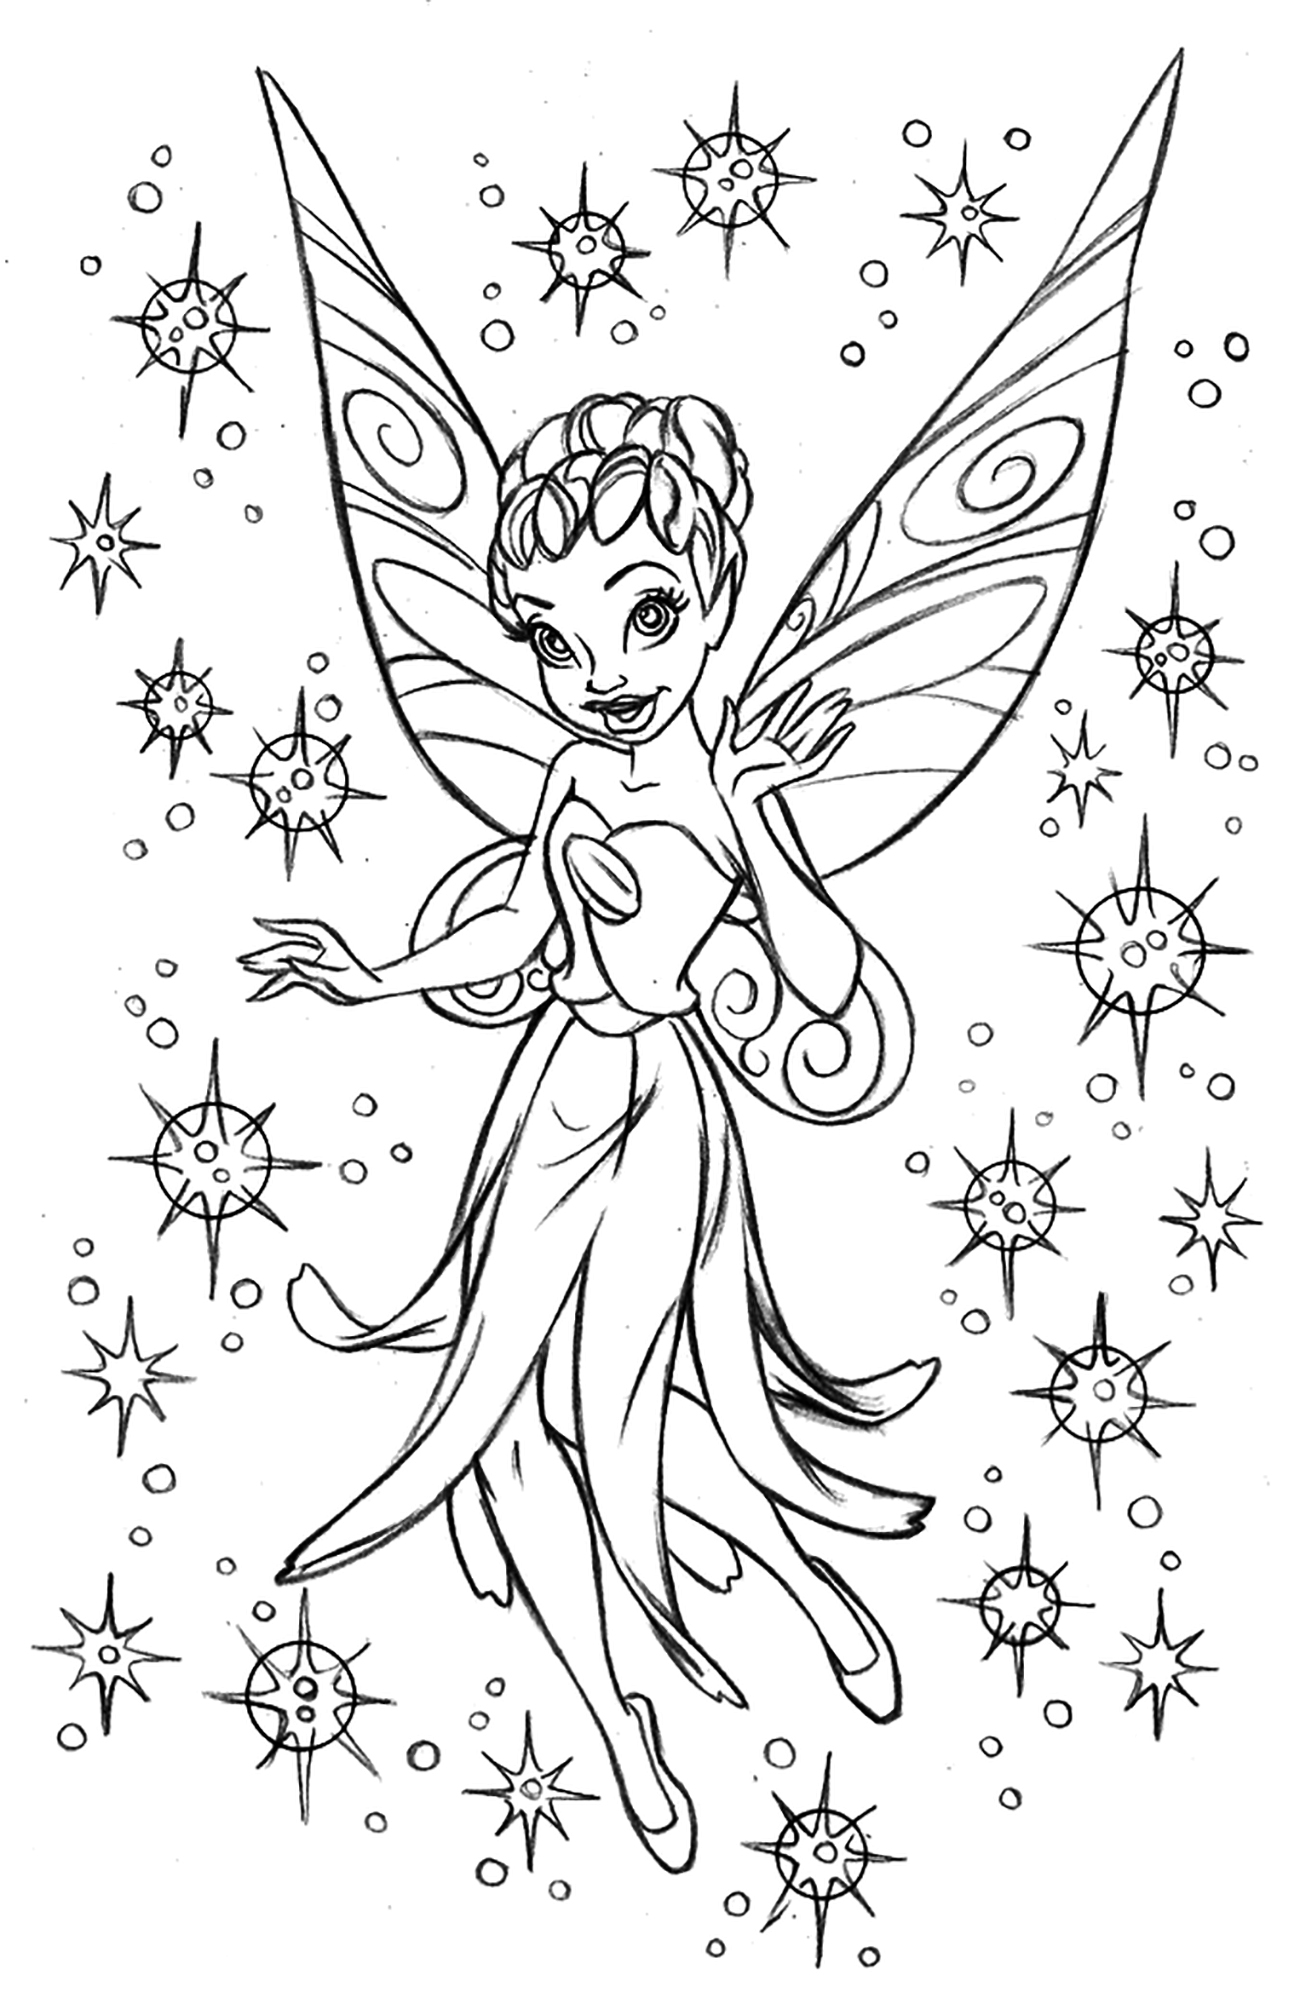 Fairy tinckerbell - Myths & legends Adult Coloring Pages